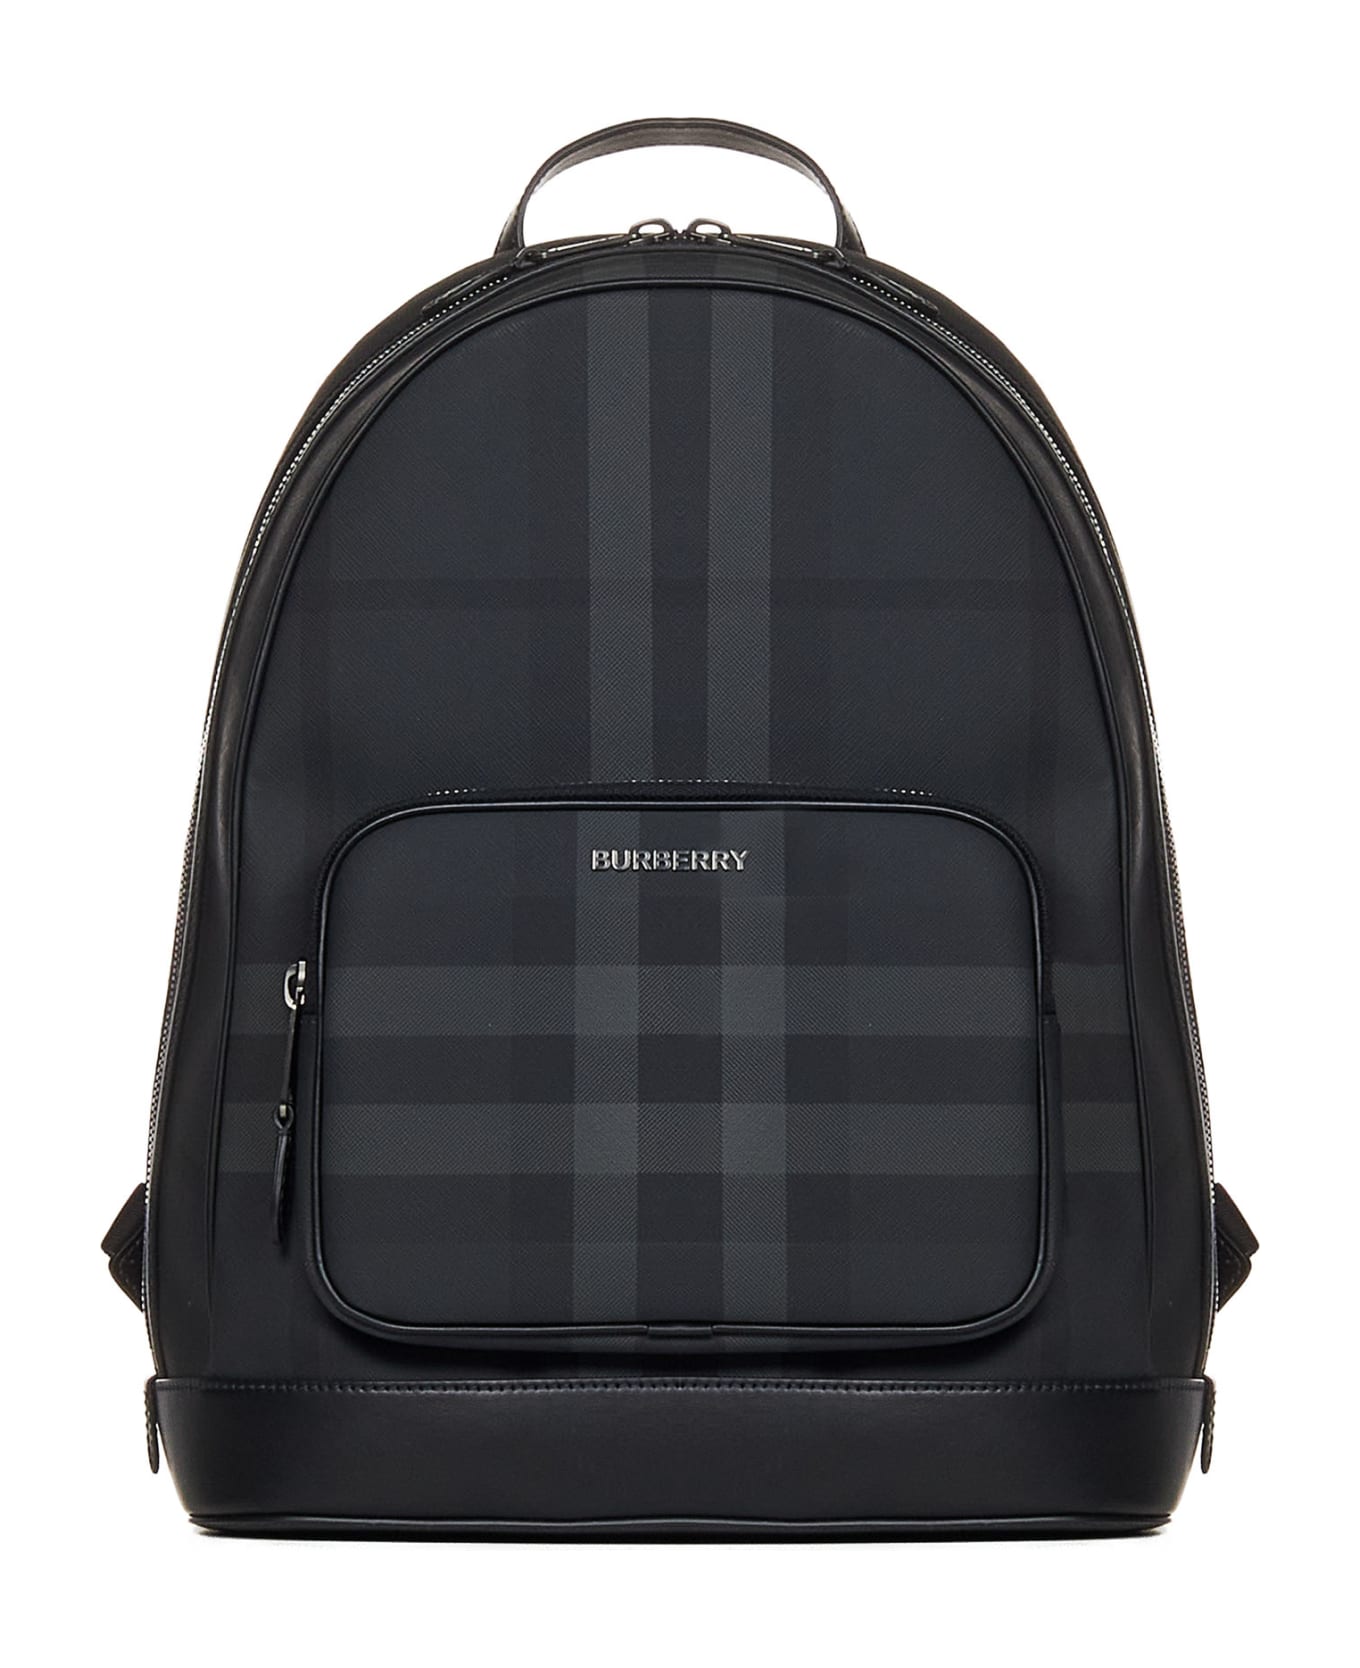 Burberry Check Backpack - A8800